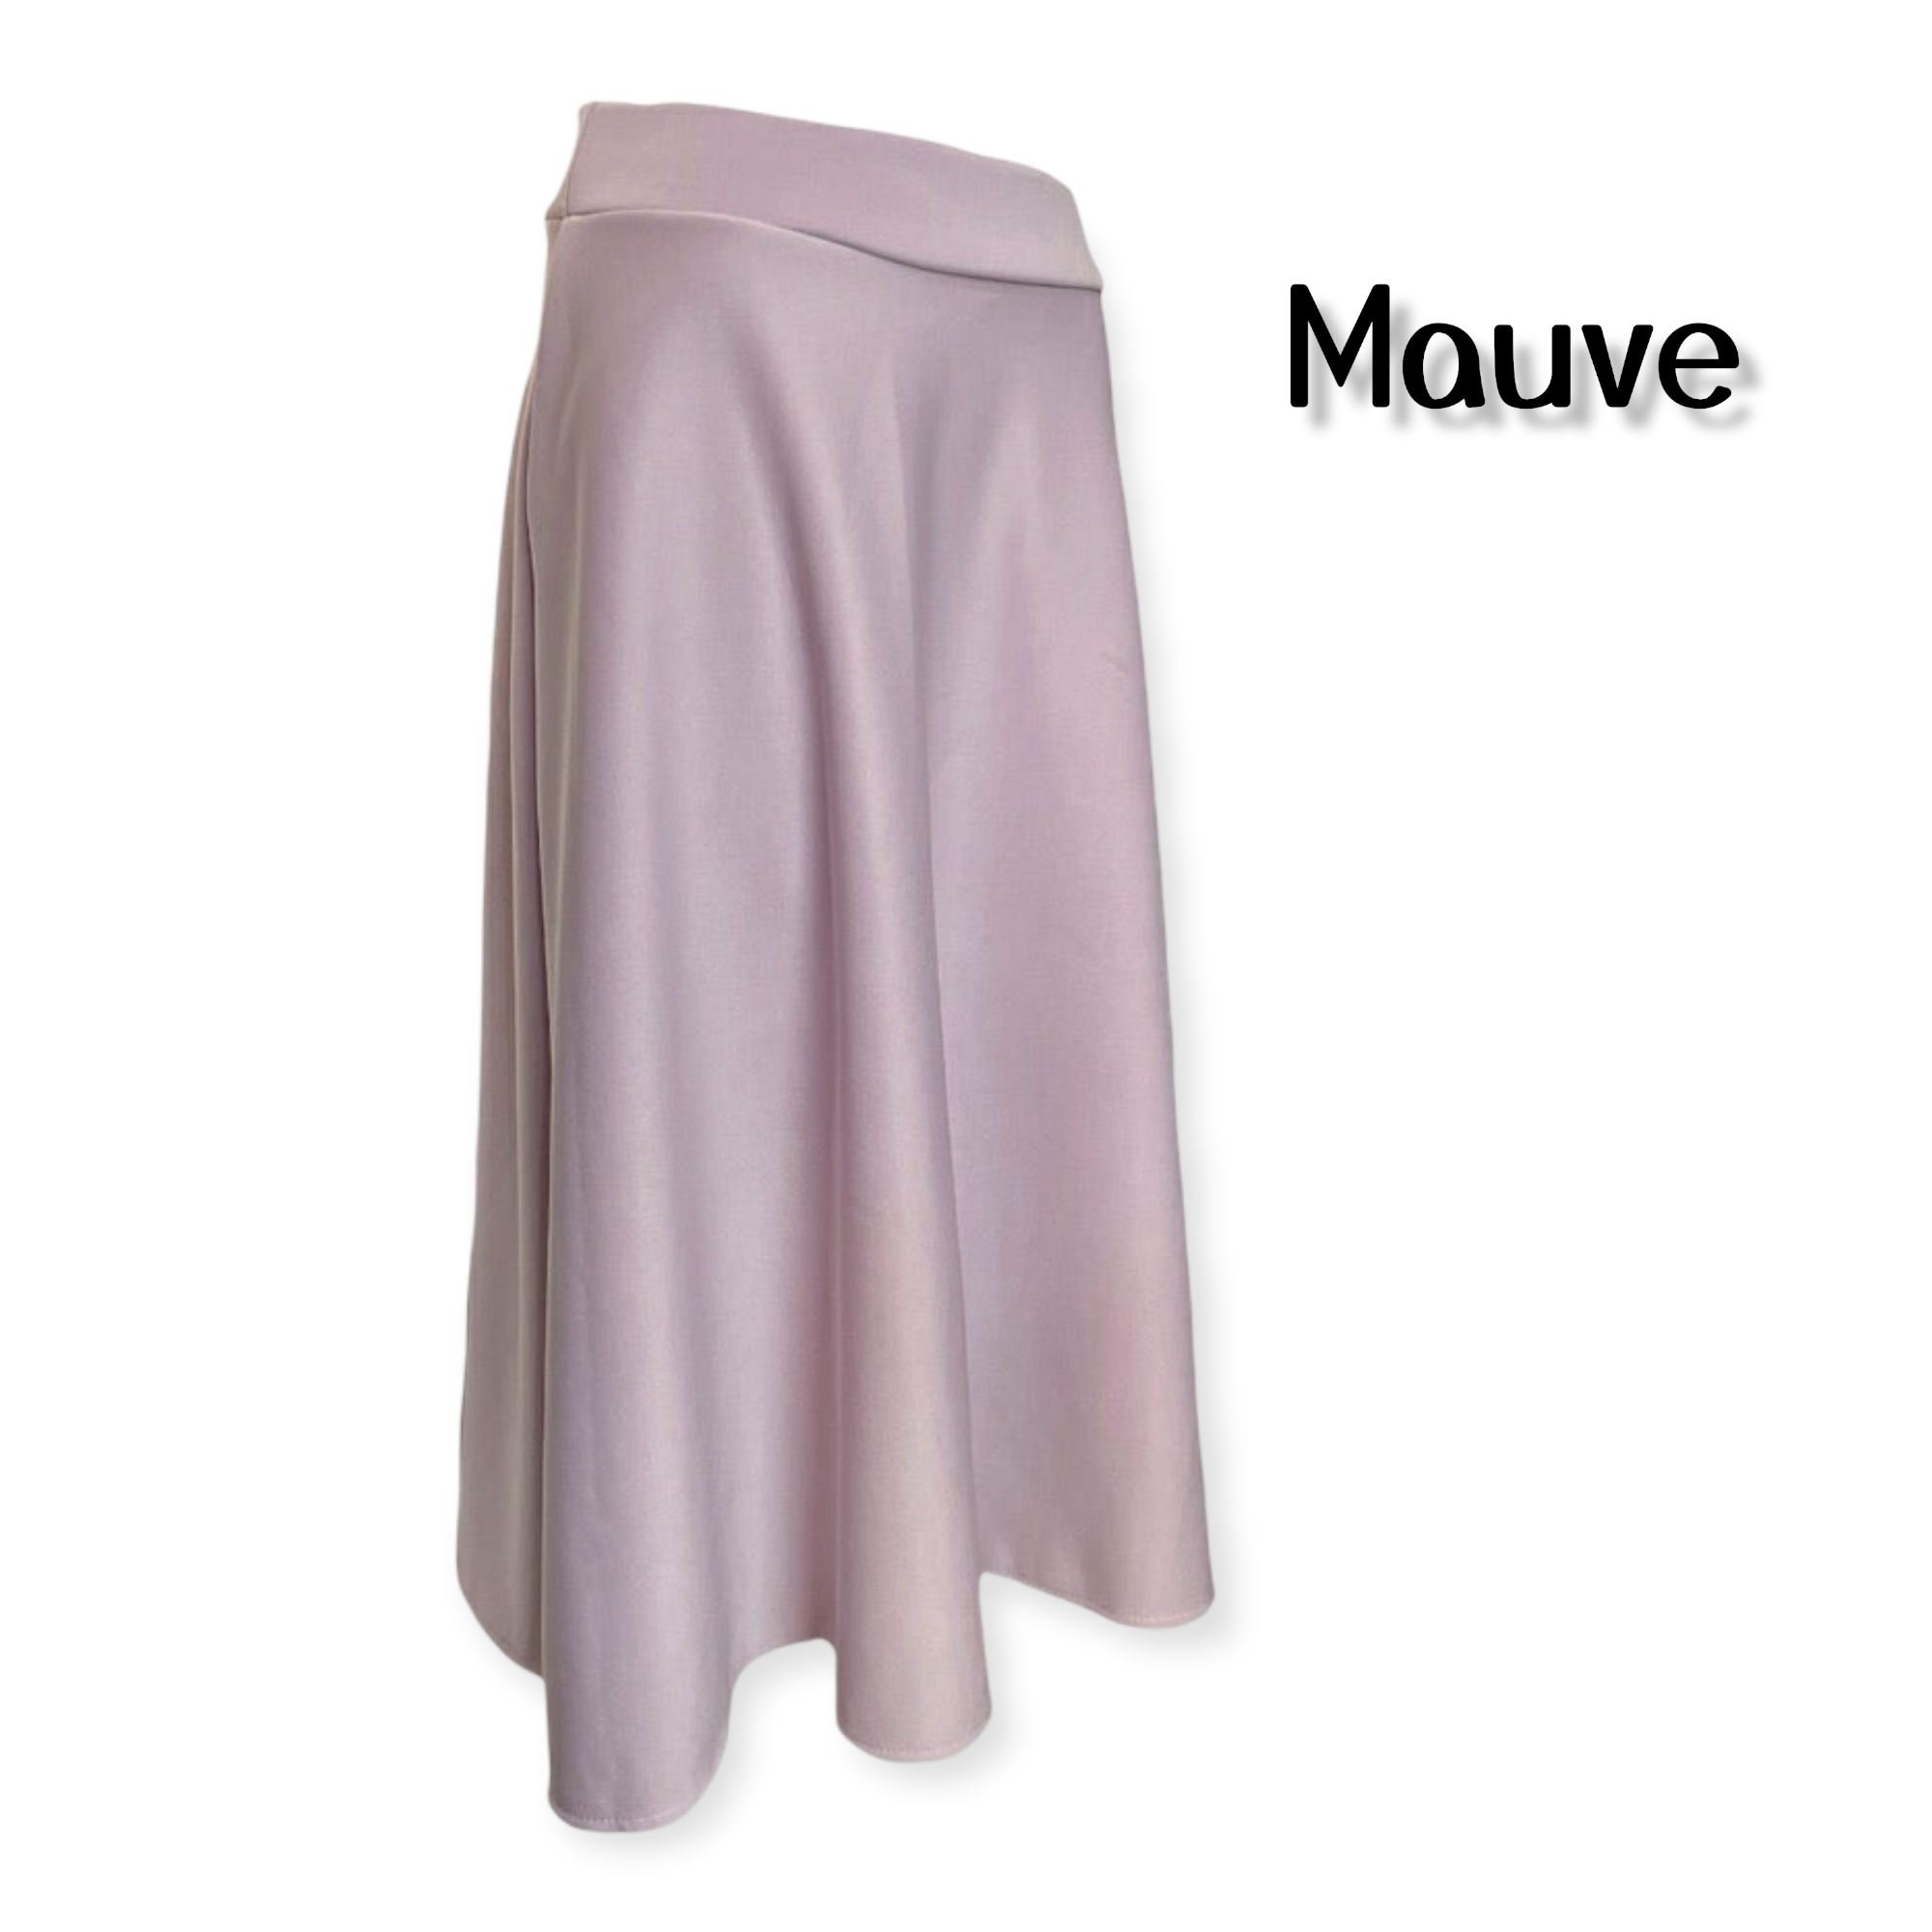 Midi Skirts, Knee Length Skirts for Women, Round Skirt With Two Pockets, Waist 26 To 34 Inches, Neoprene